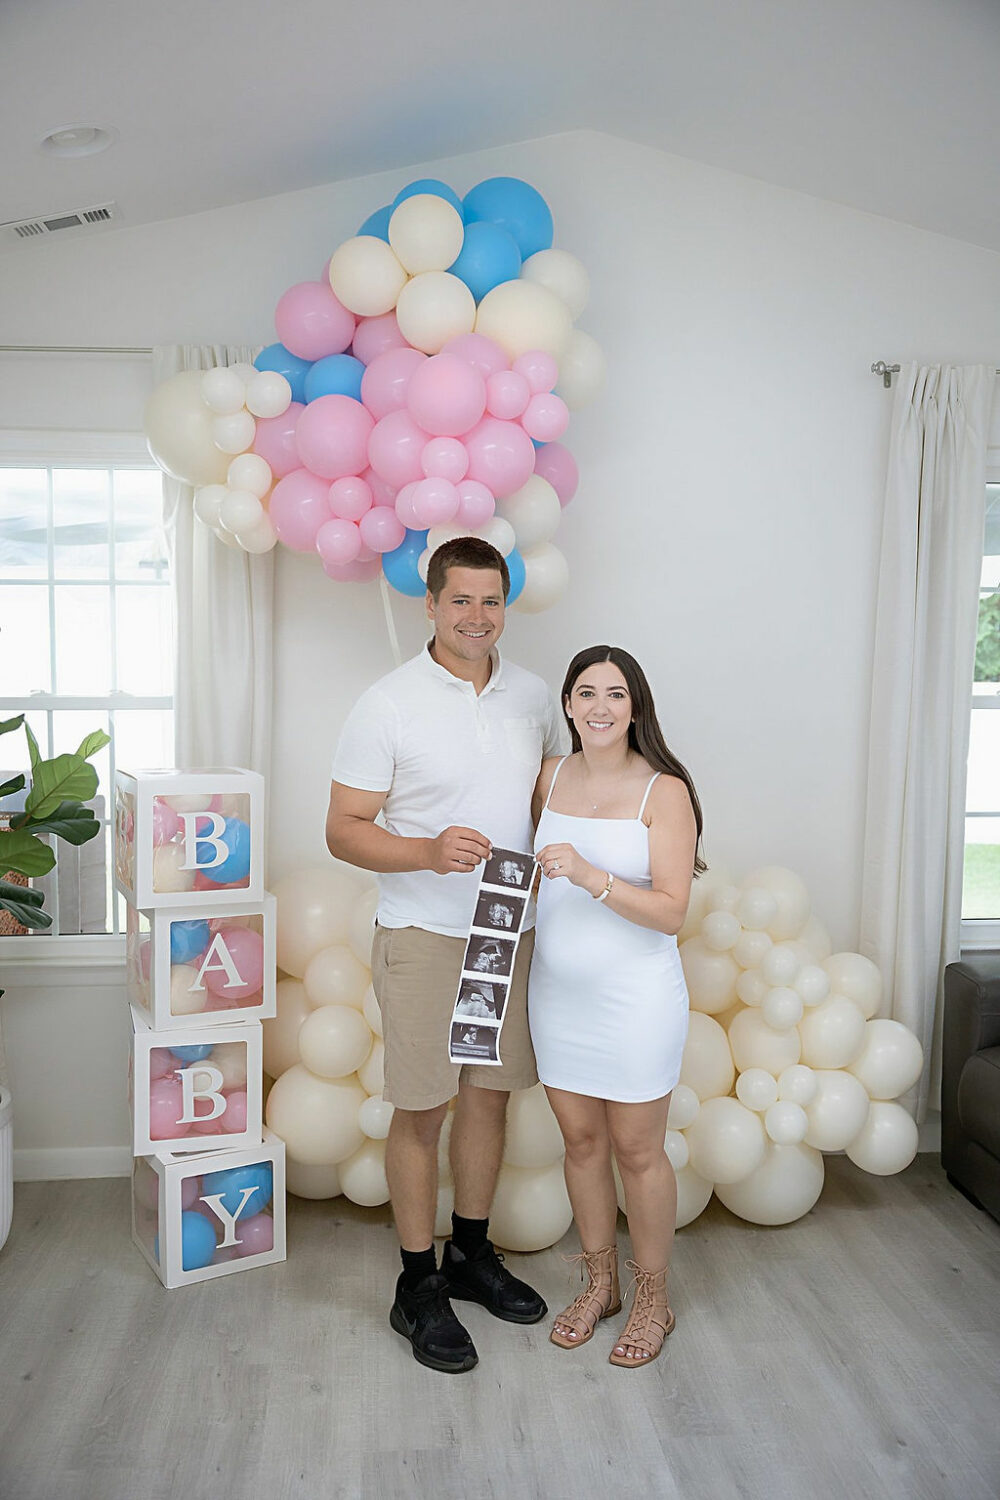 Man and woman standing next to each other, holding ultrasound, photos taken during their gender reveal photo session in Eastampton, New Jersey.